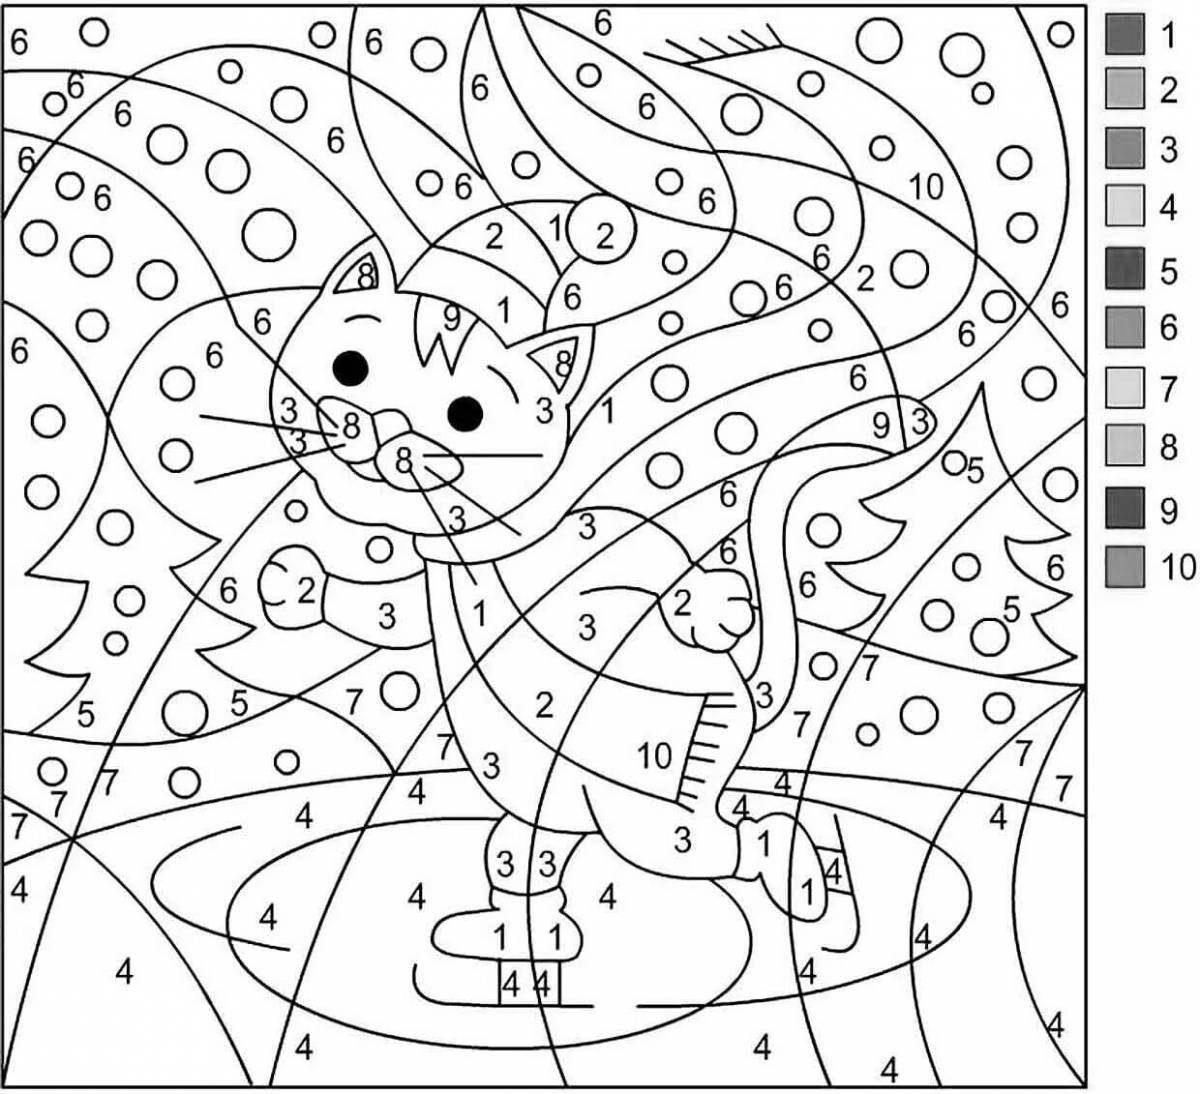 Kitty dazzling coloring by numbers